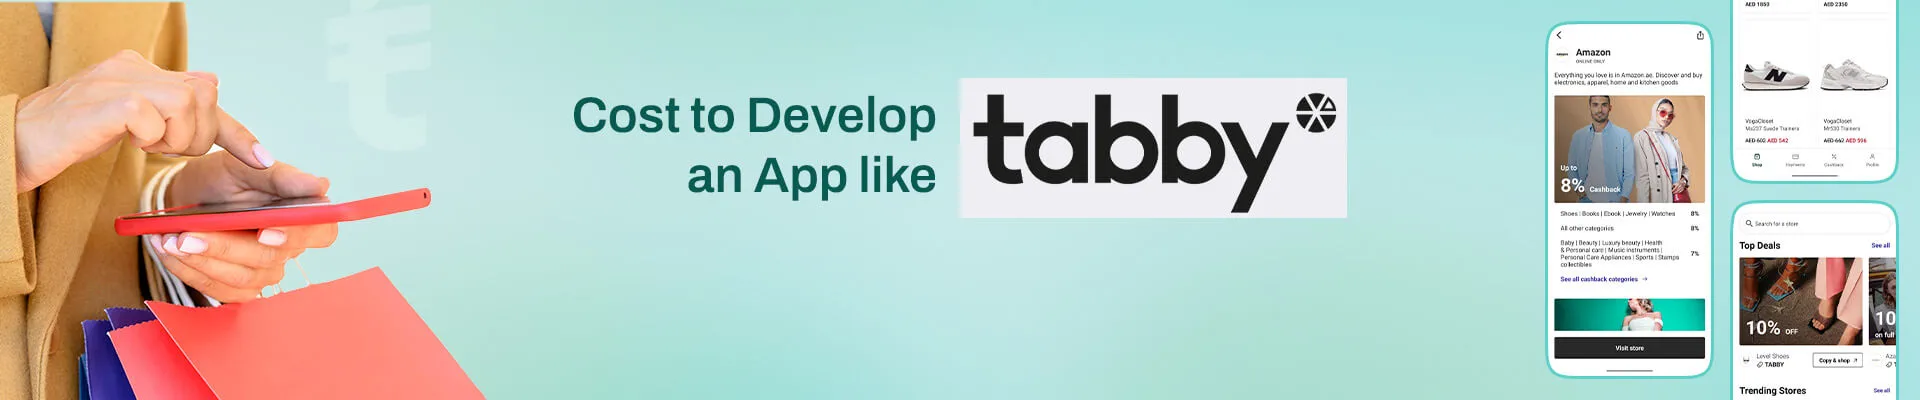 Cost to Develop an App like Tabby